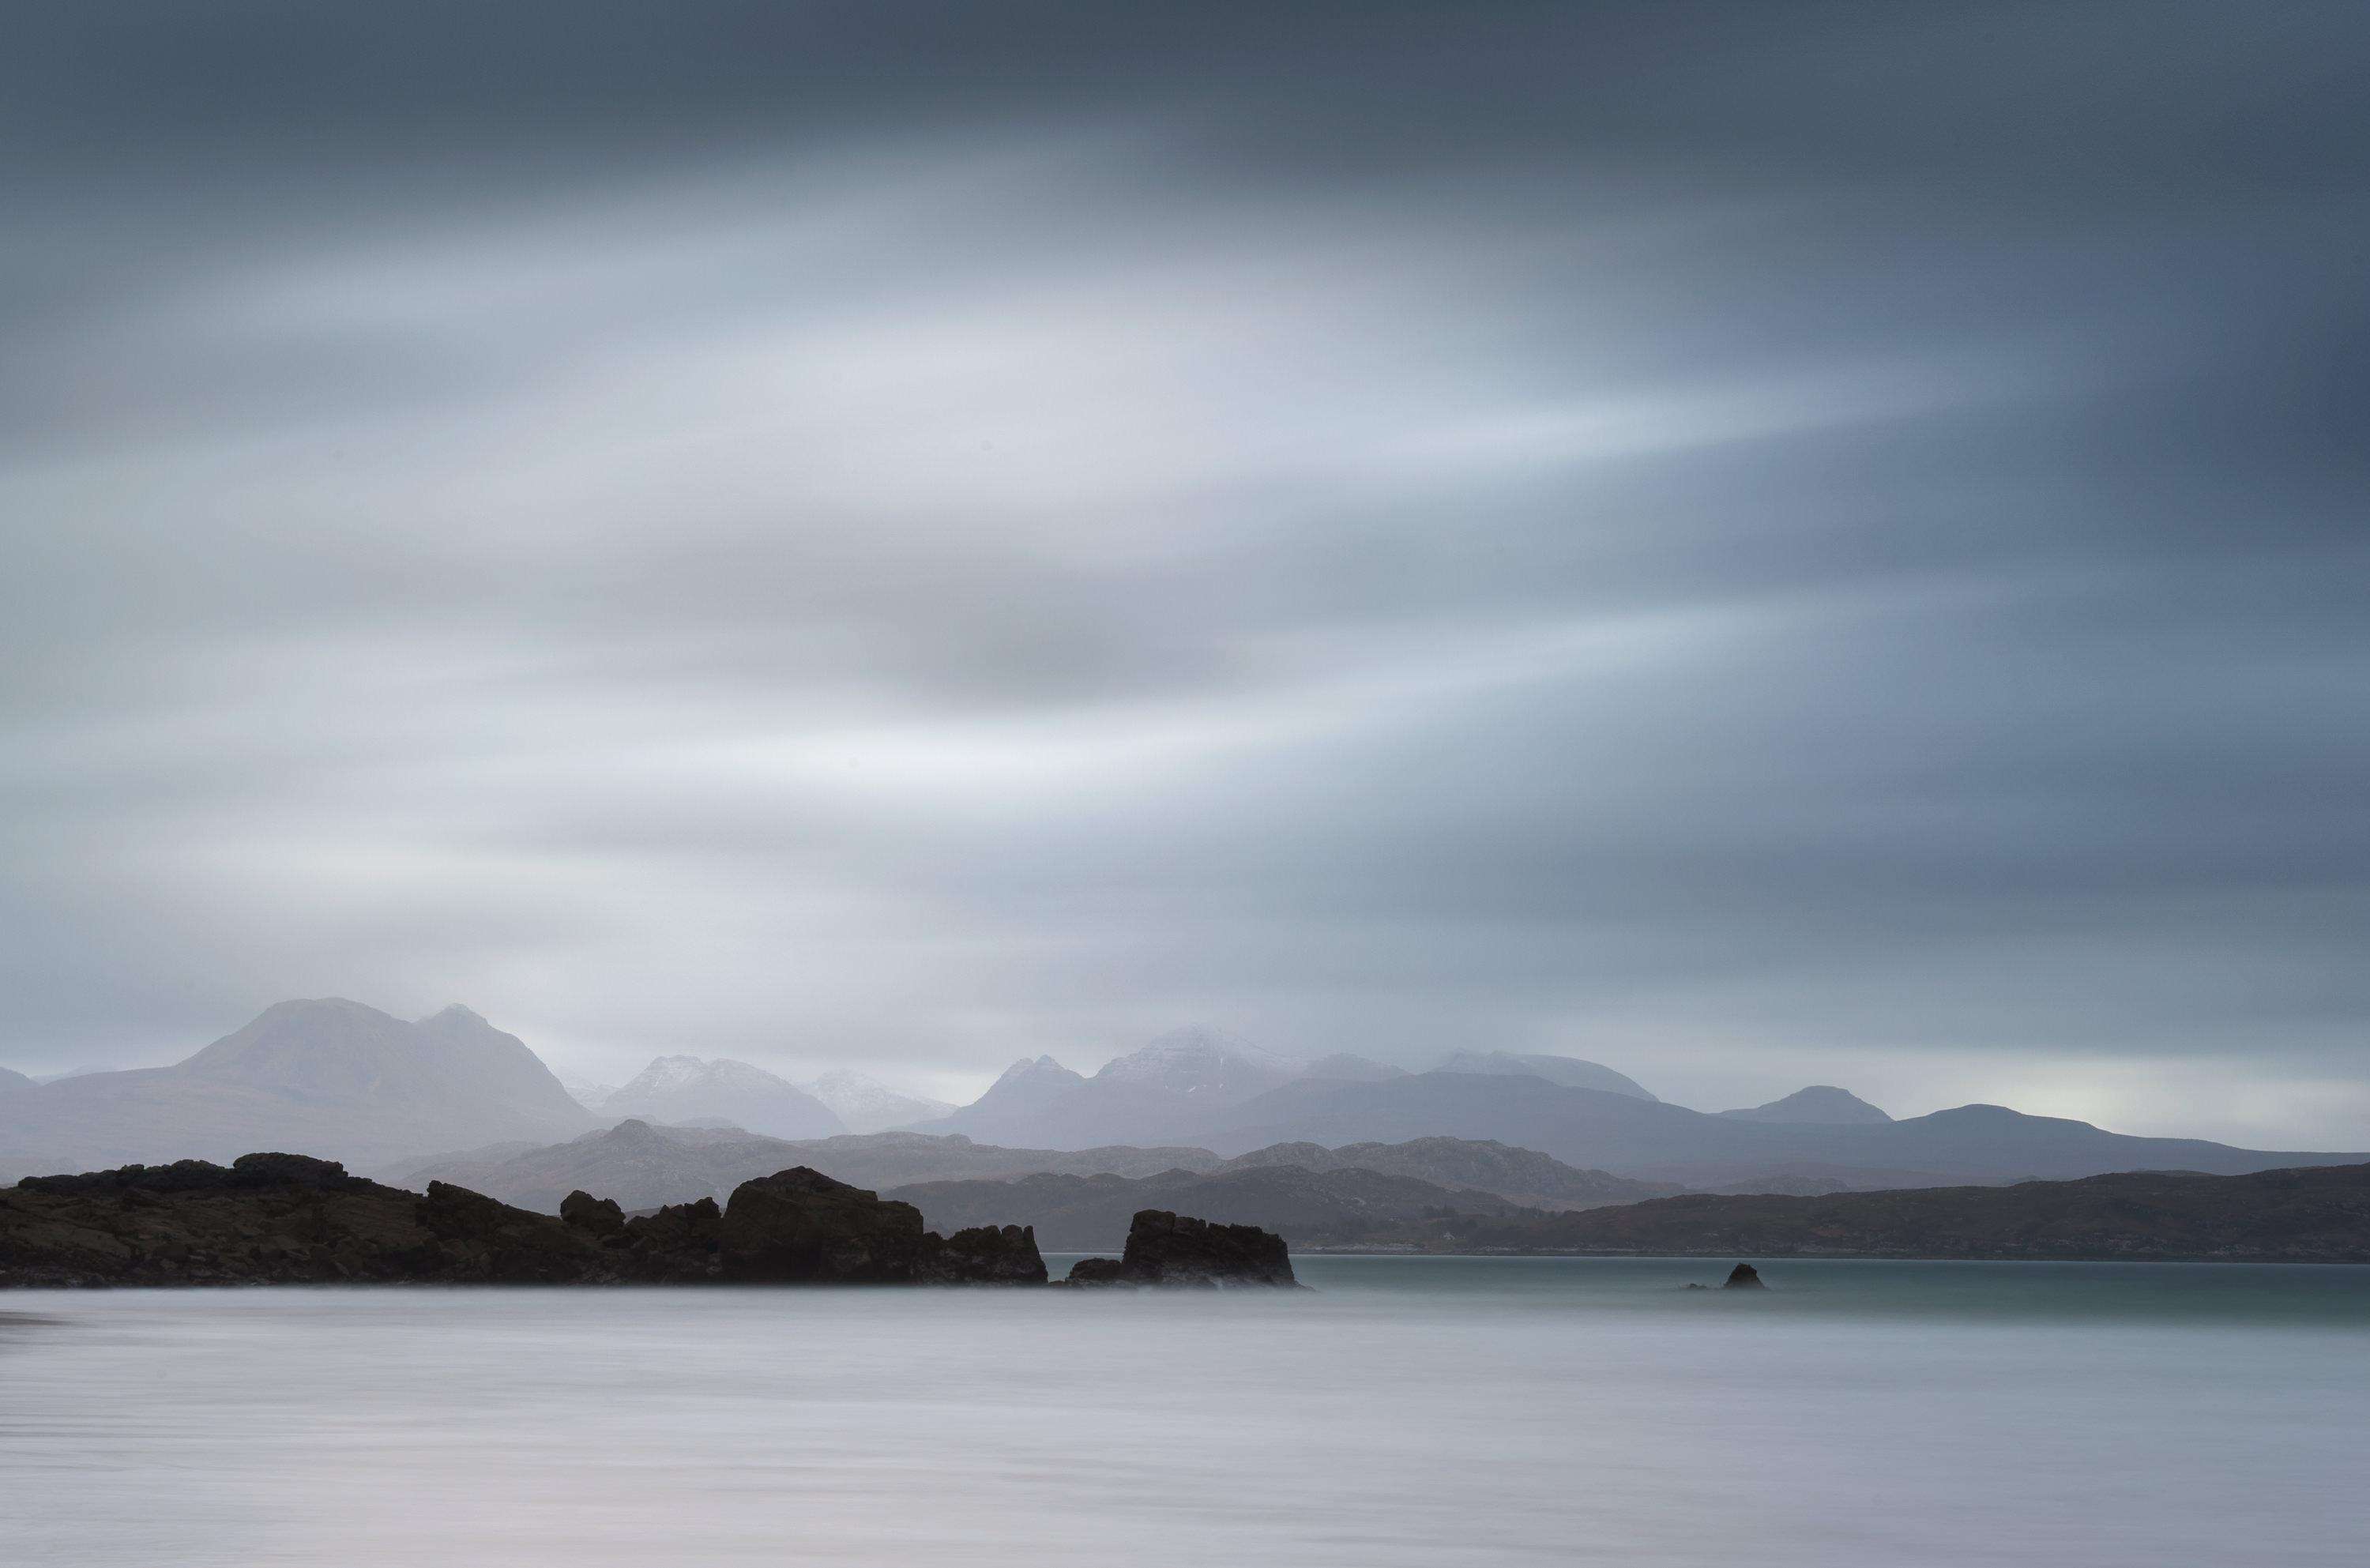 Ressesions at Gairloch by Paul Gallagher aspect2i